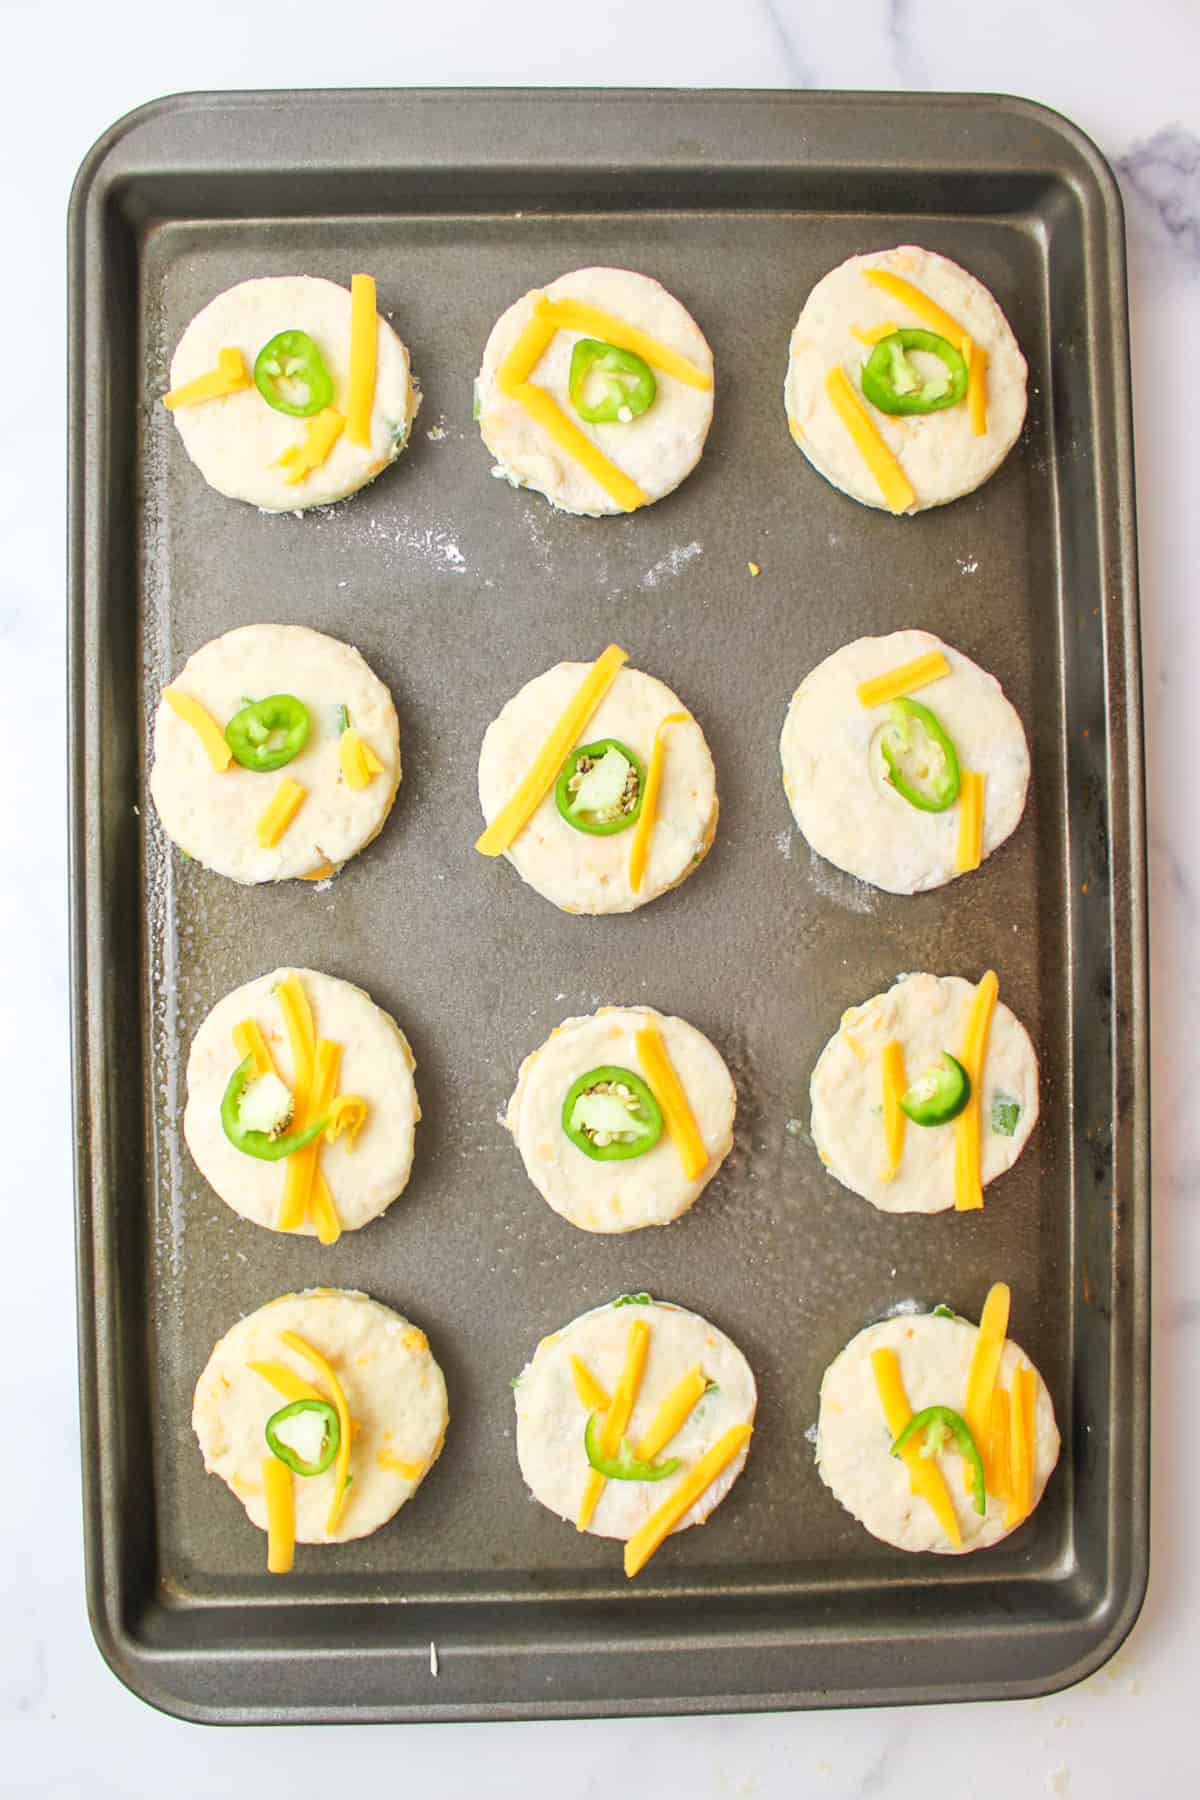 Jalapeno cheddar biscuits topped with shredded cheese and sliced jalapenos on a baking sheet.